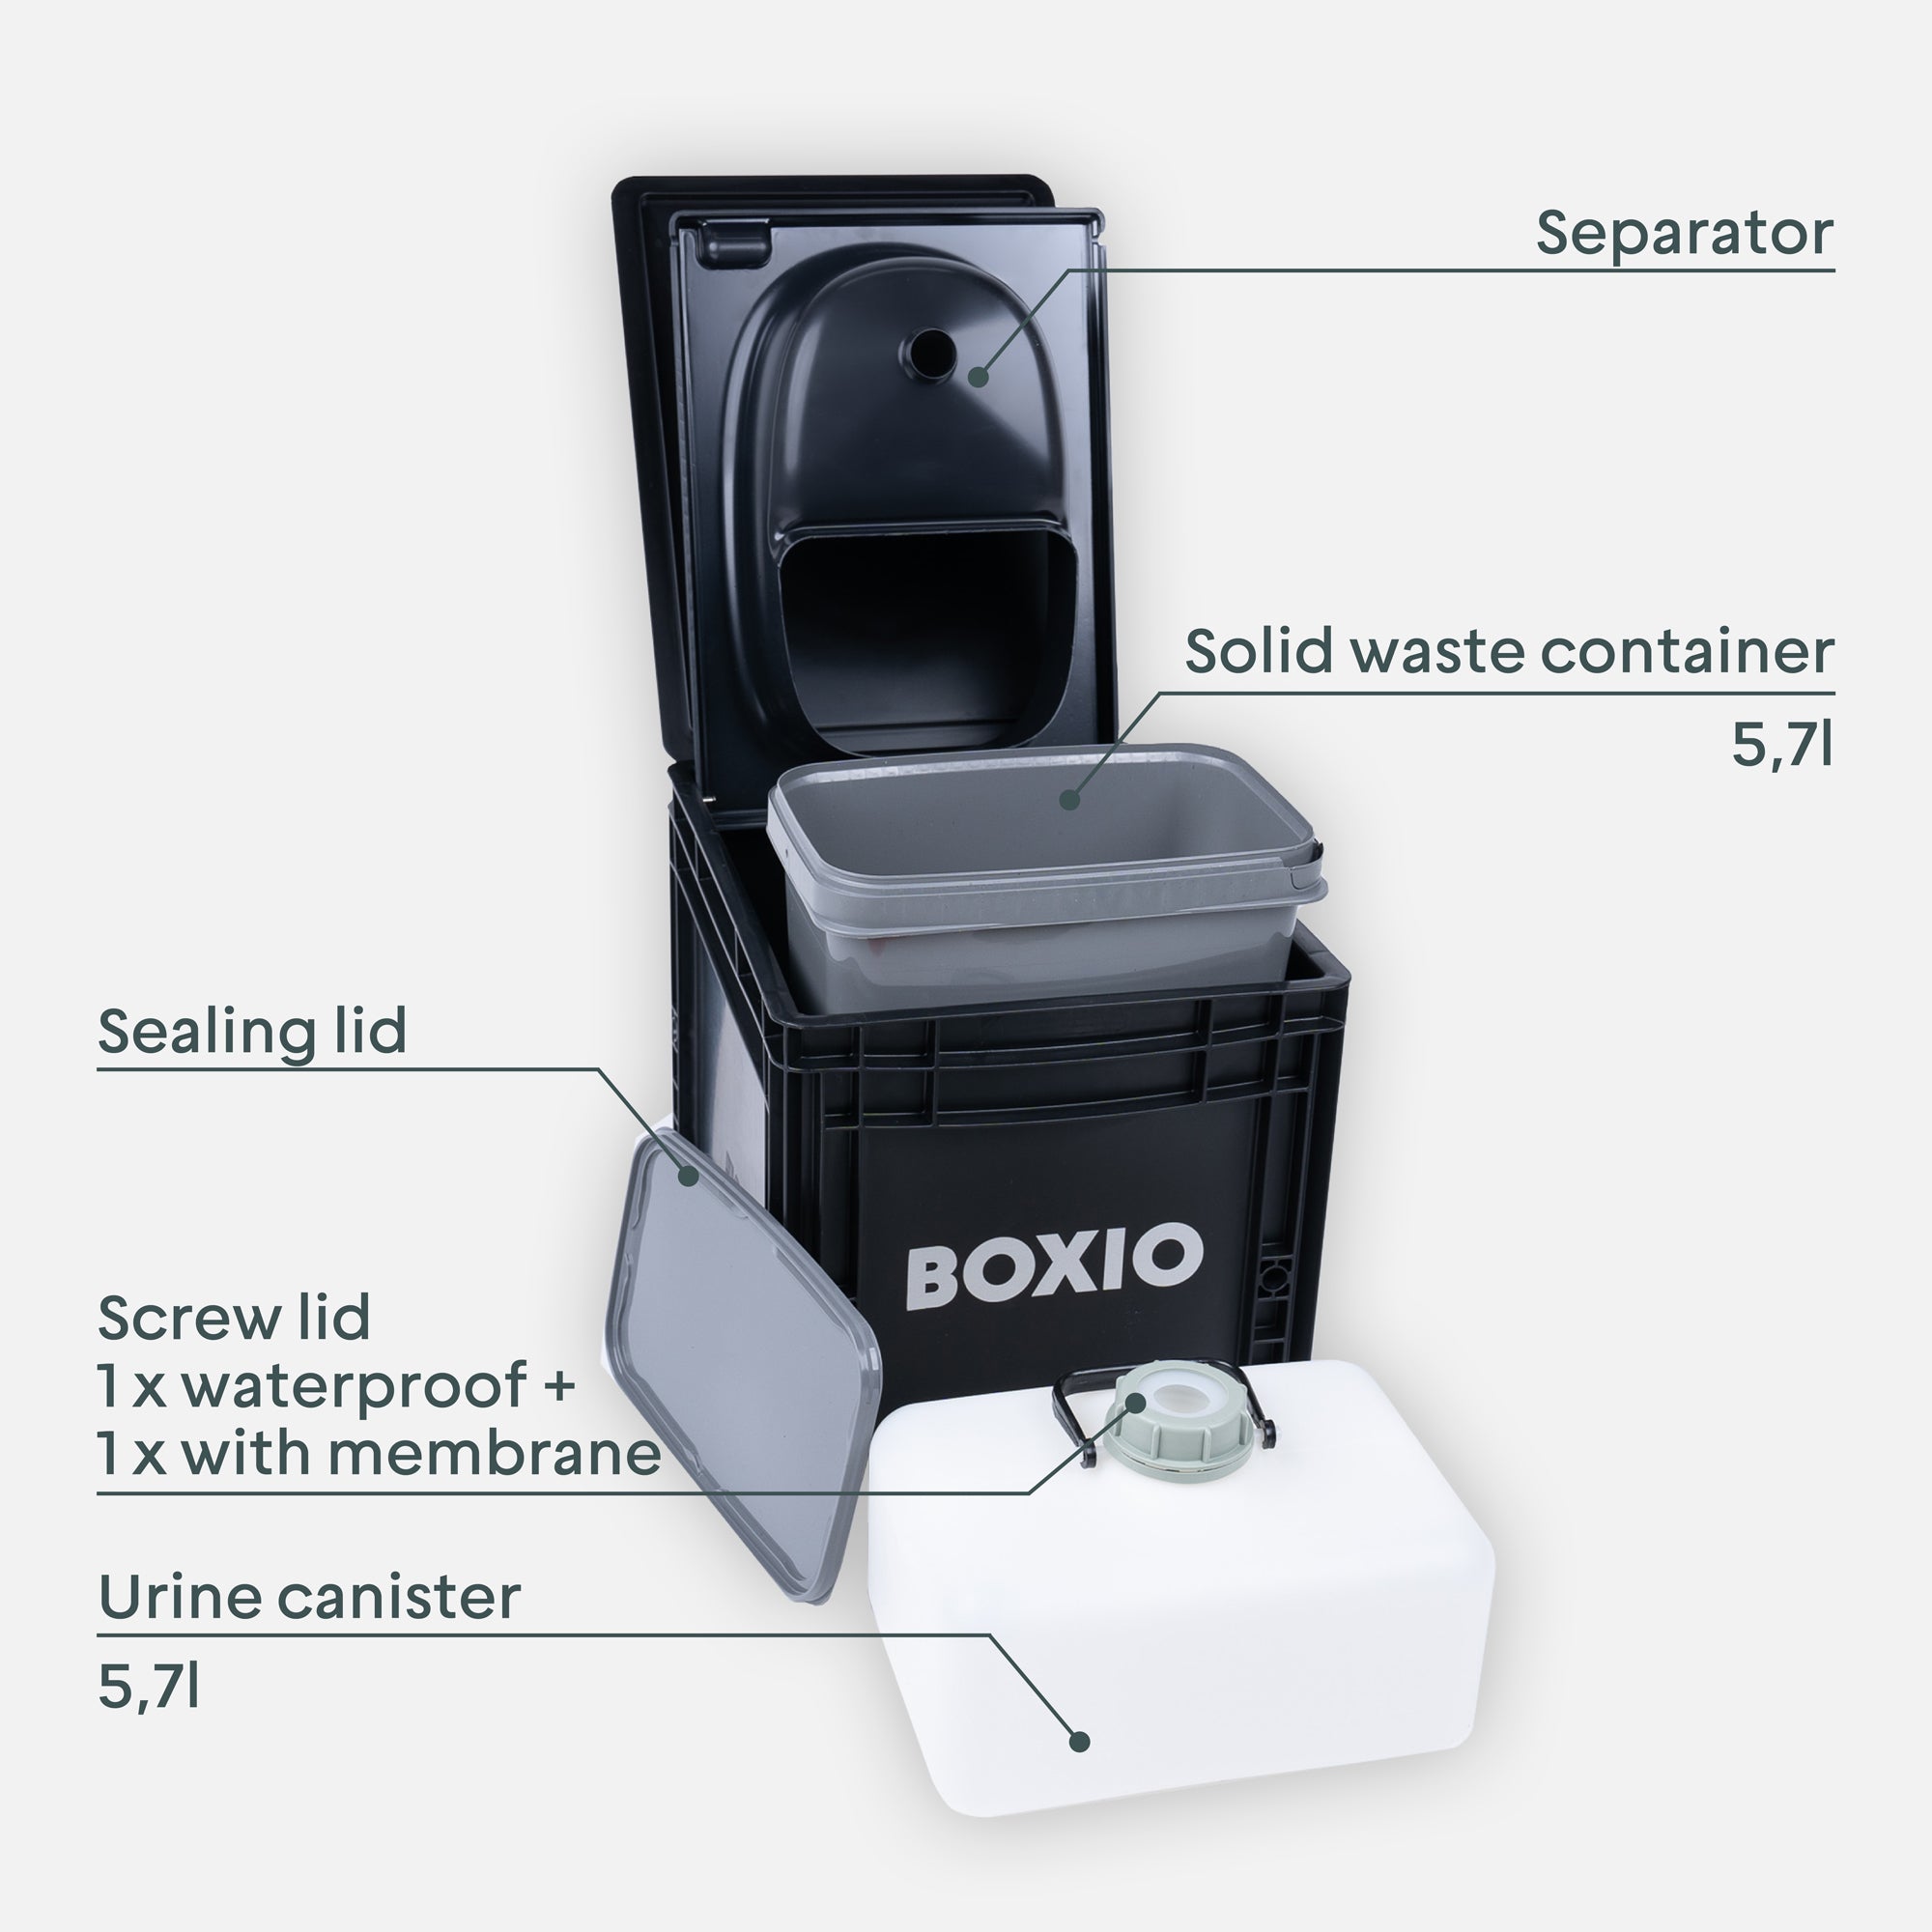 BOXIO TOILET - Buy the inexpensive separation toilet in compact Eurobox  format